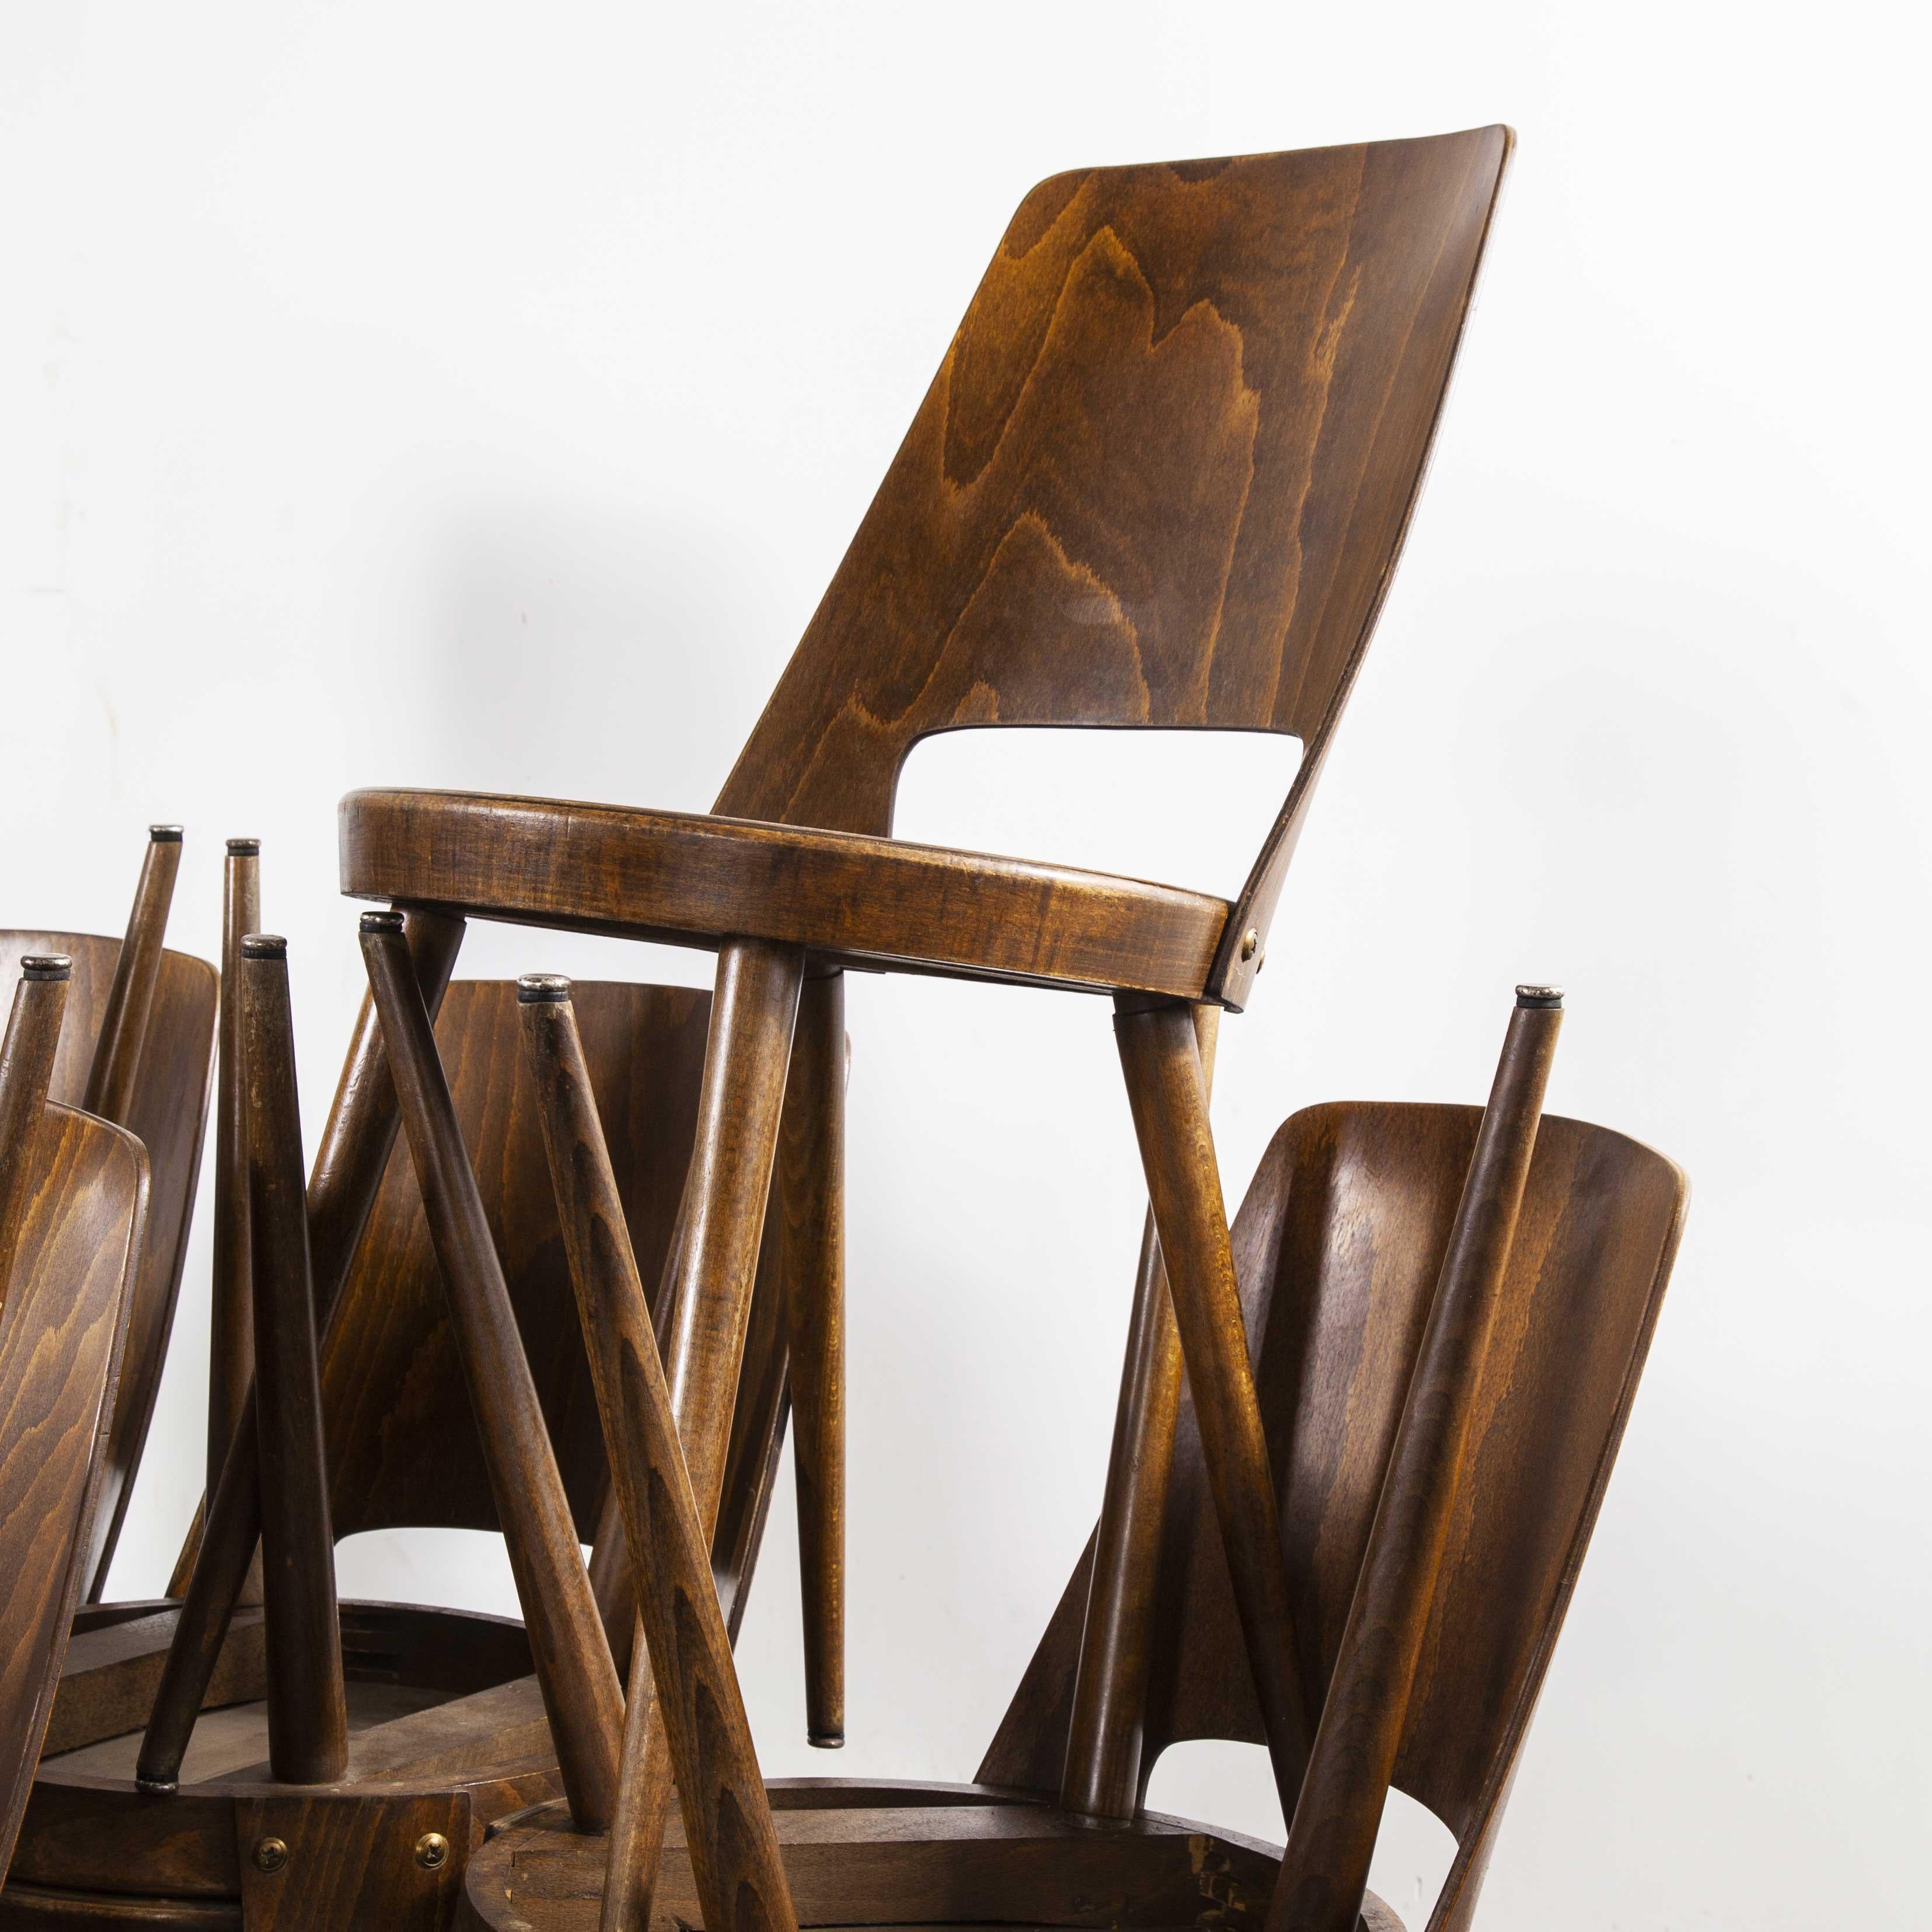 1960s French Baumann bentwood mondor dining chair, set of twenty four

1960s French Baumann bentwood mondor dining chair, set of twenty four. Classic beech bistro chair made in France by the maker Joamin Baumann. Baumann is a slightly off the